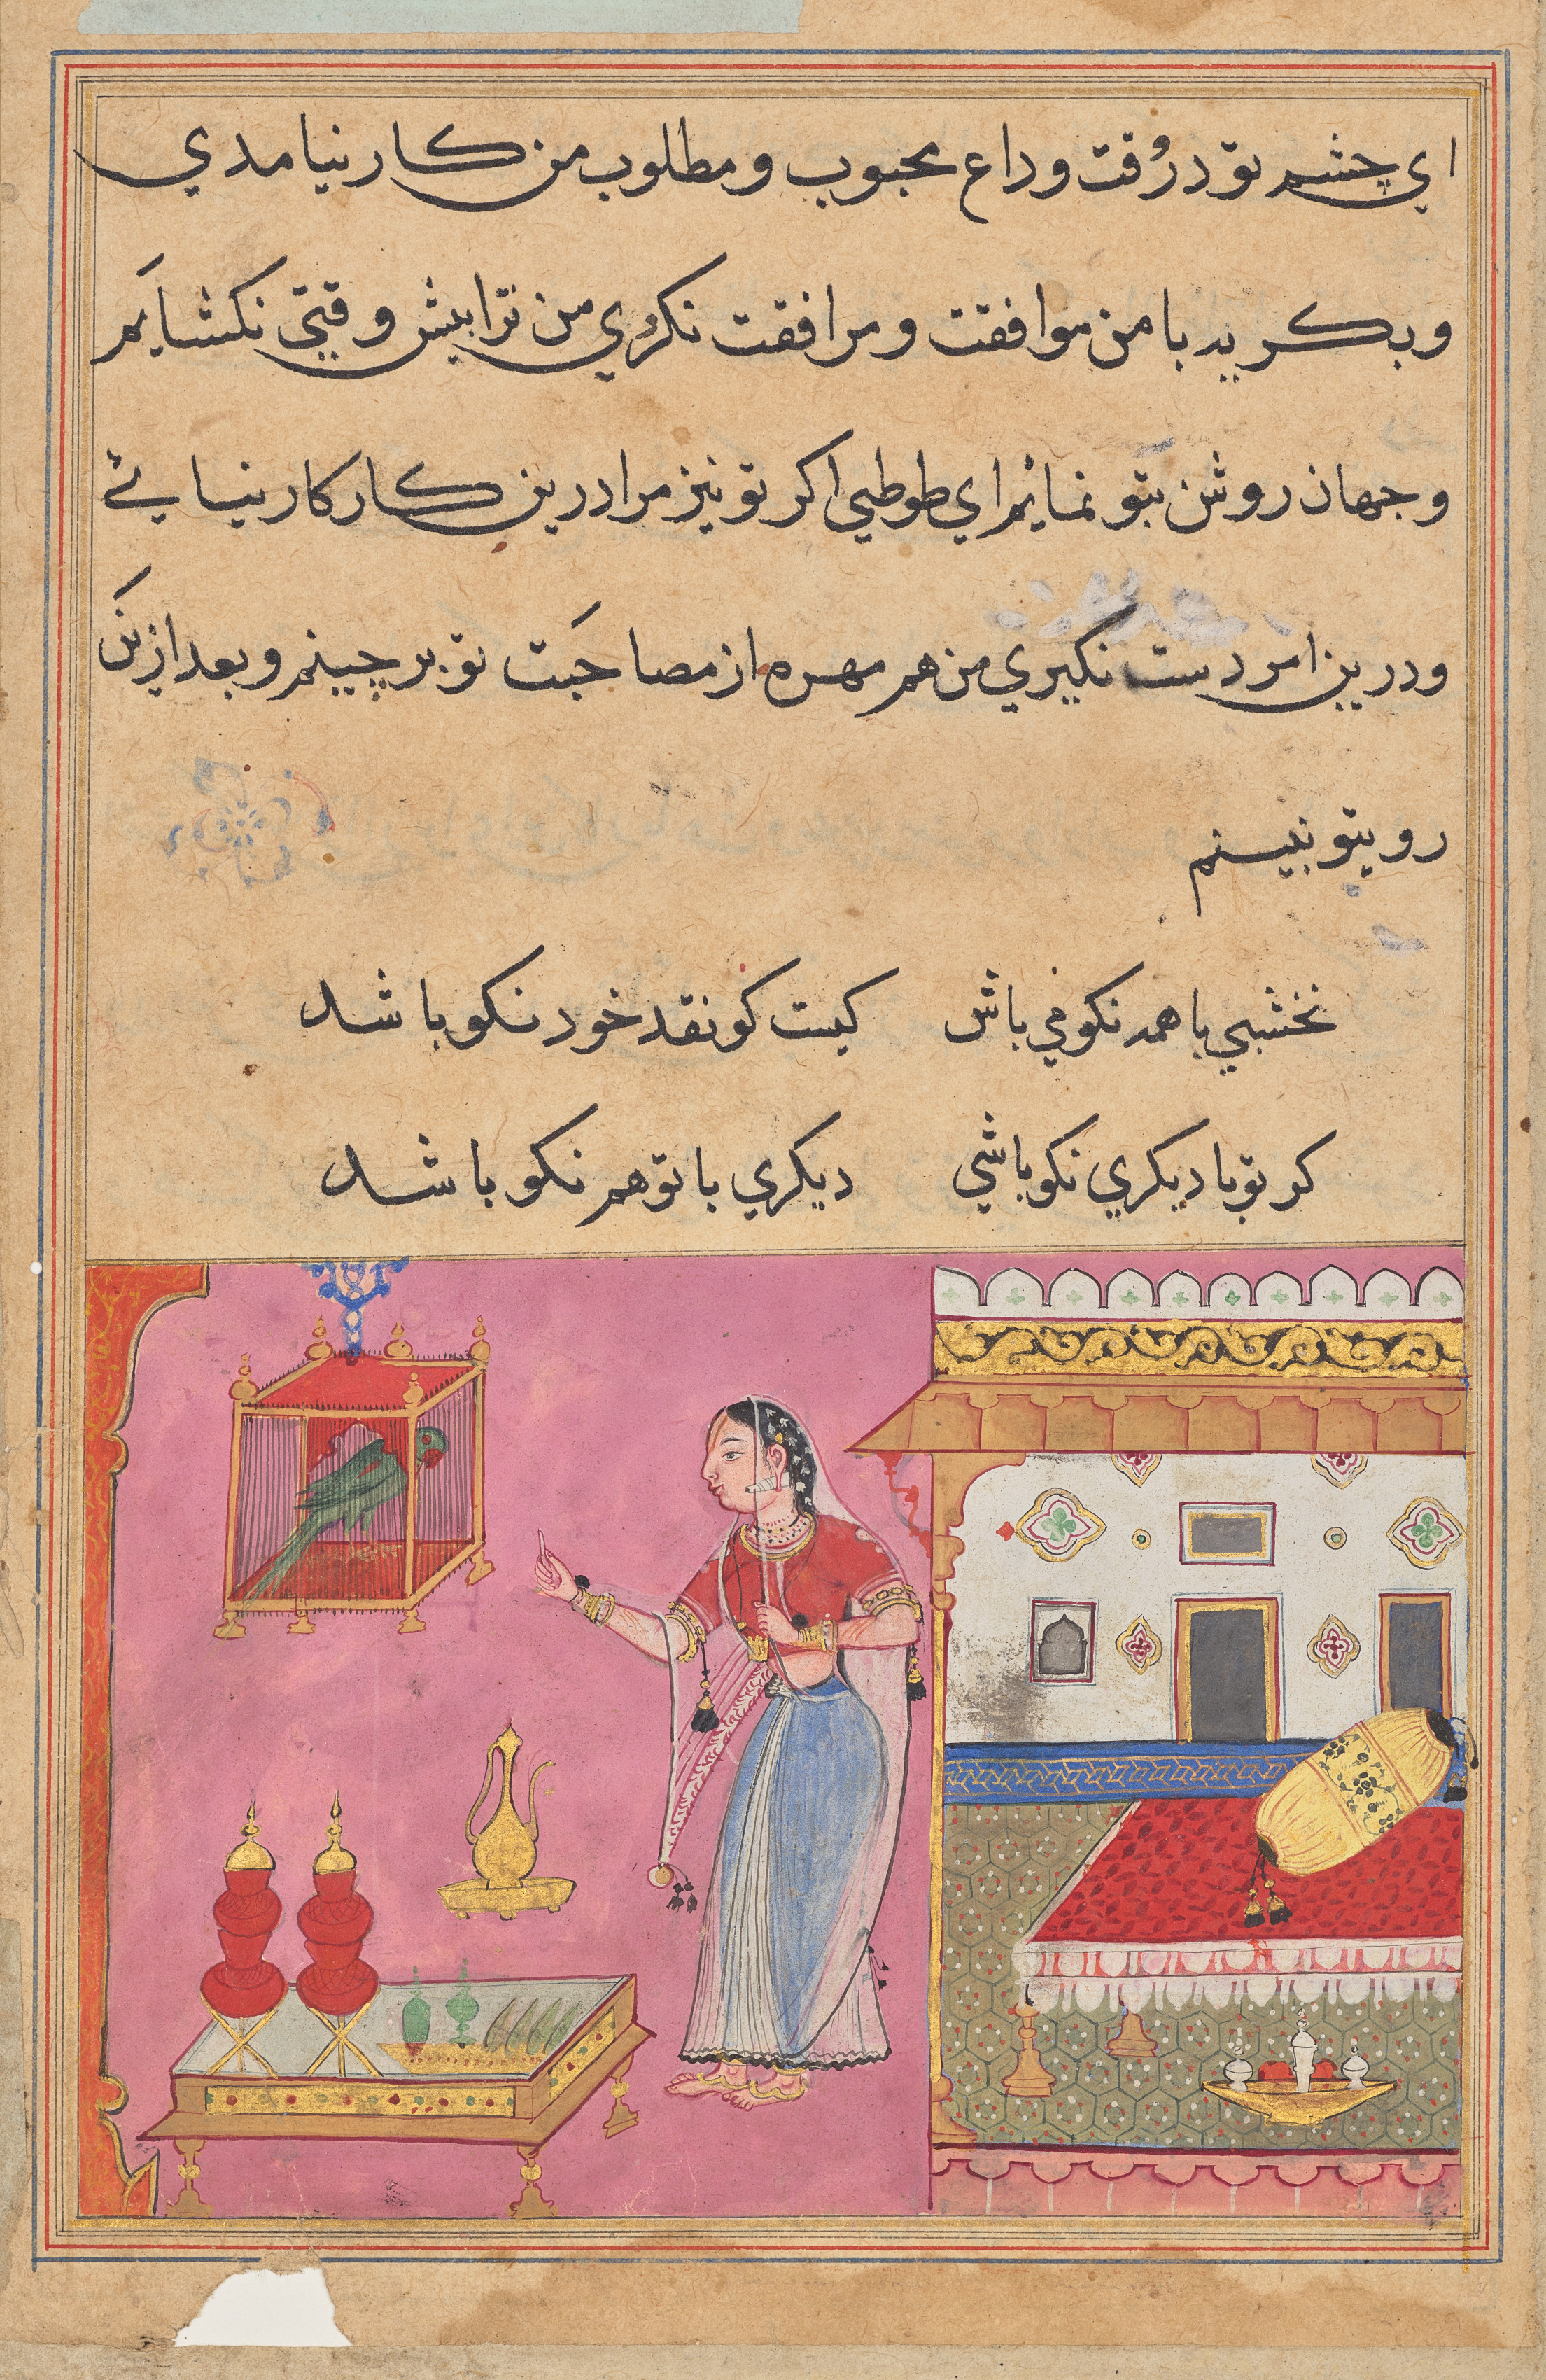 The Parrot Addresses Khujasta at the Beginning of the Twentieth Night, from a Tuti-nama (Tales of a Parrot)